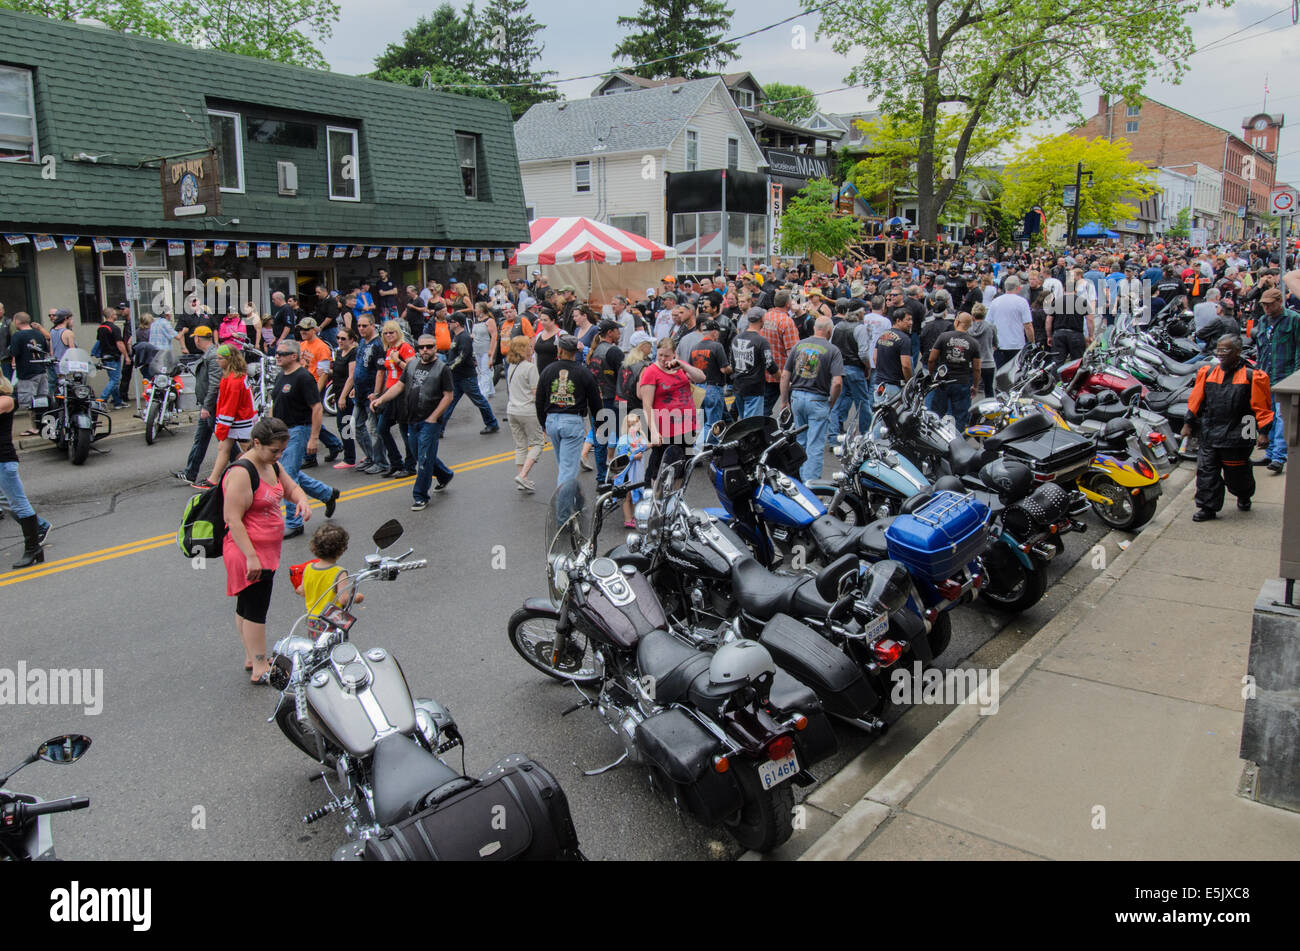 View of the crowd on the main street of Port Dover, Ontario, Canada, during the 'Friday the Thirteenth' motorcycle rally. Stock Photo